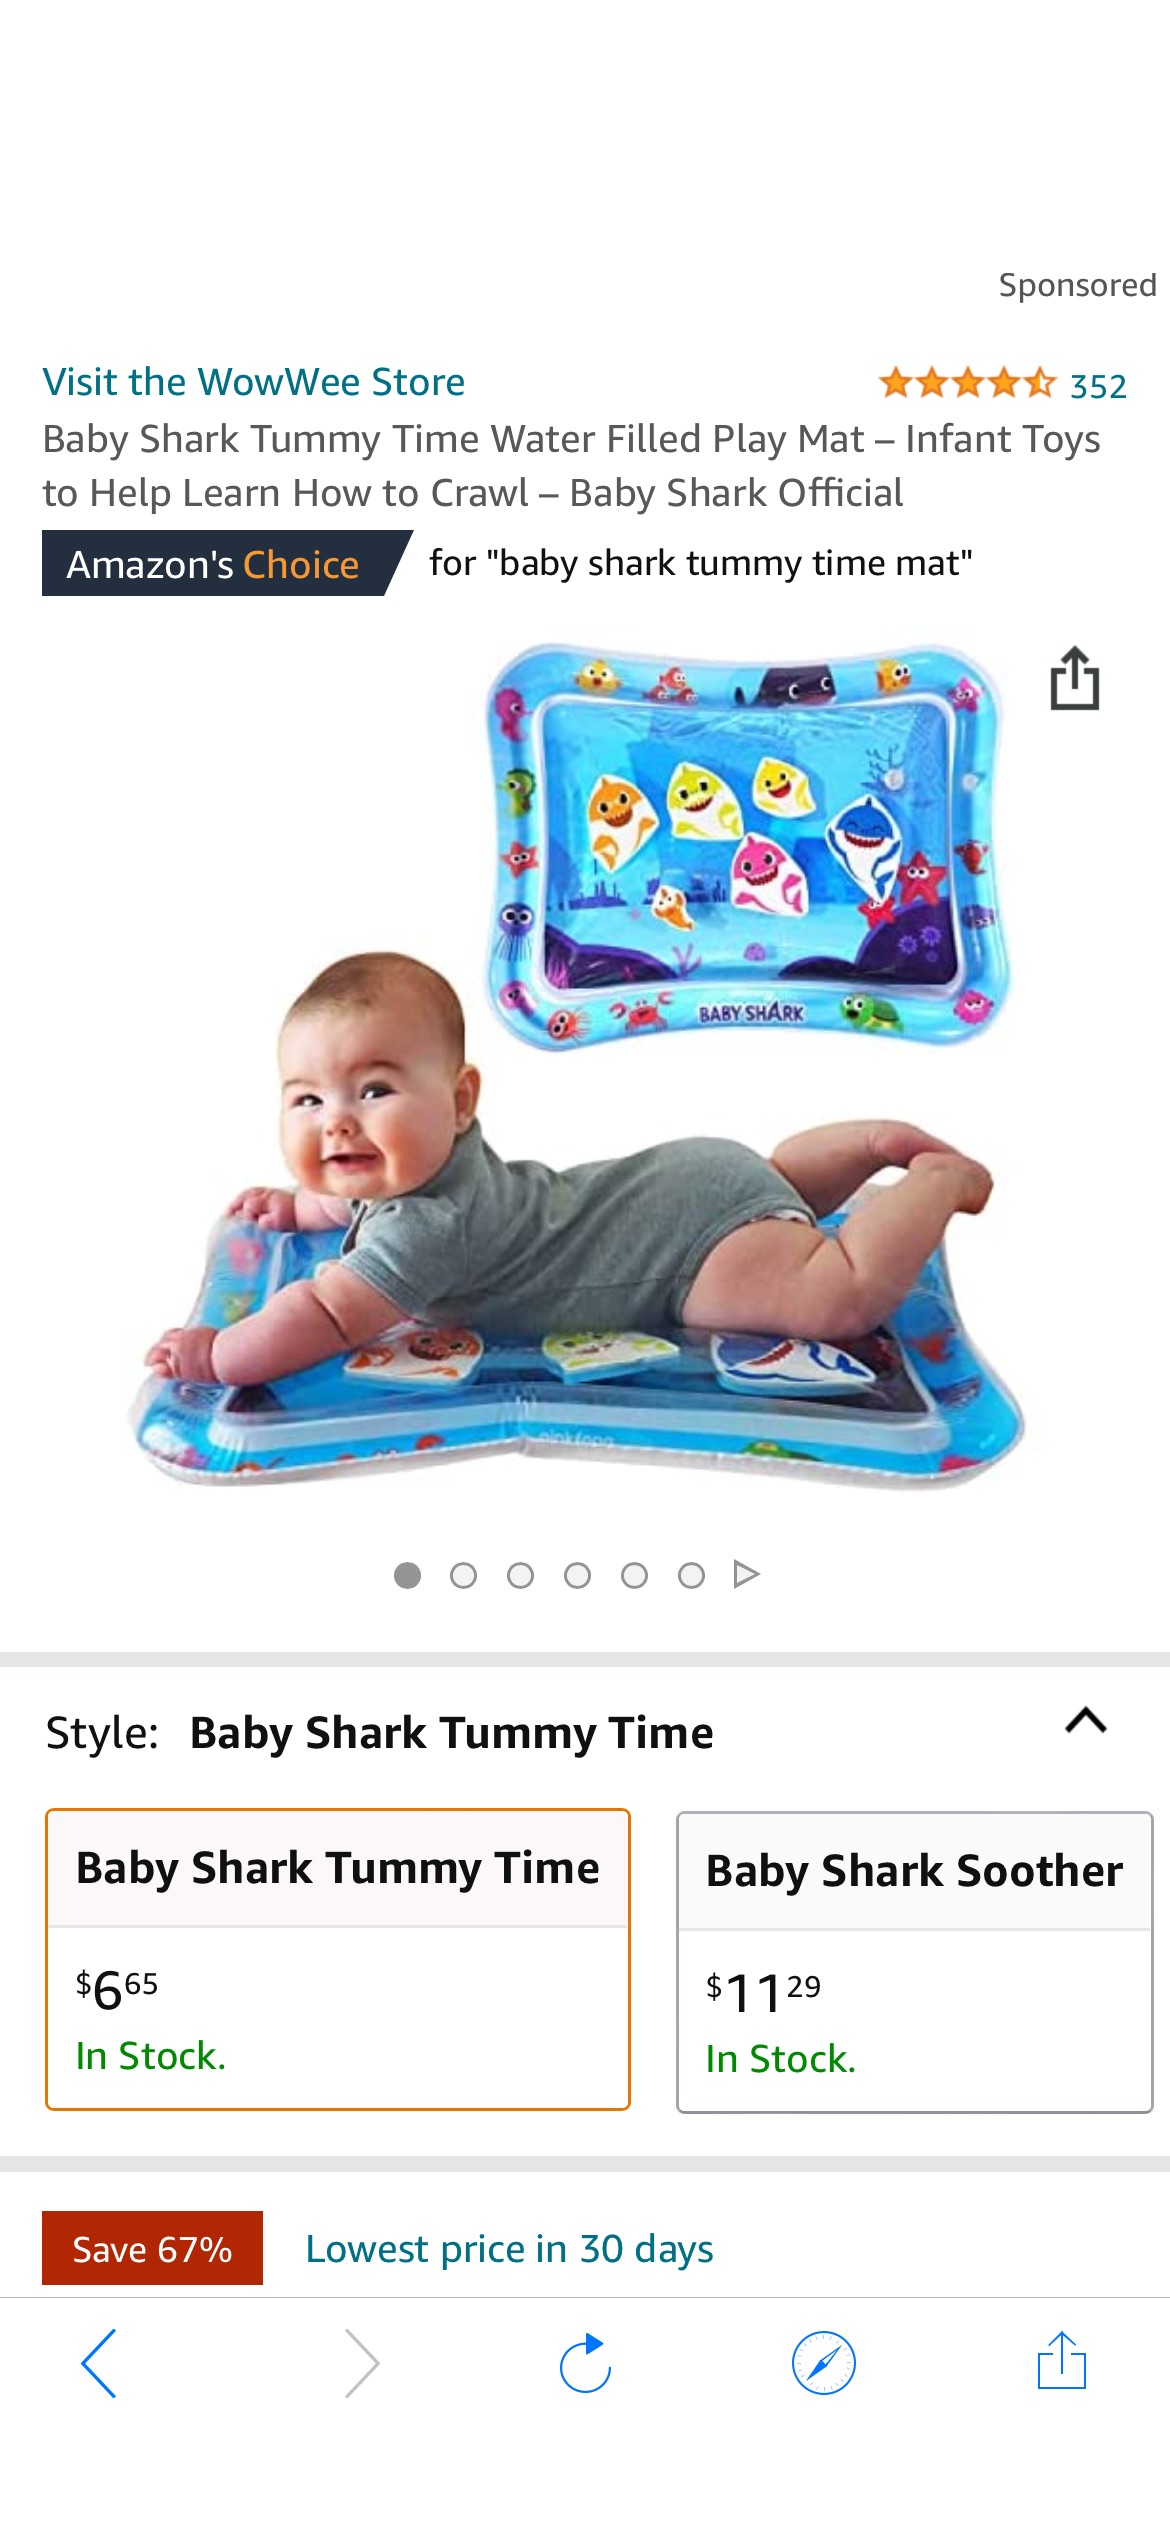 Amazon.com: Baby Shark Tummy Time Water Filled Play Mat – Infant Toys to Help Learn How to Crawl – 宝宝鲨鱼tummy time垫子